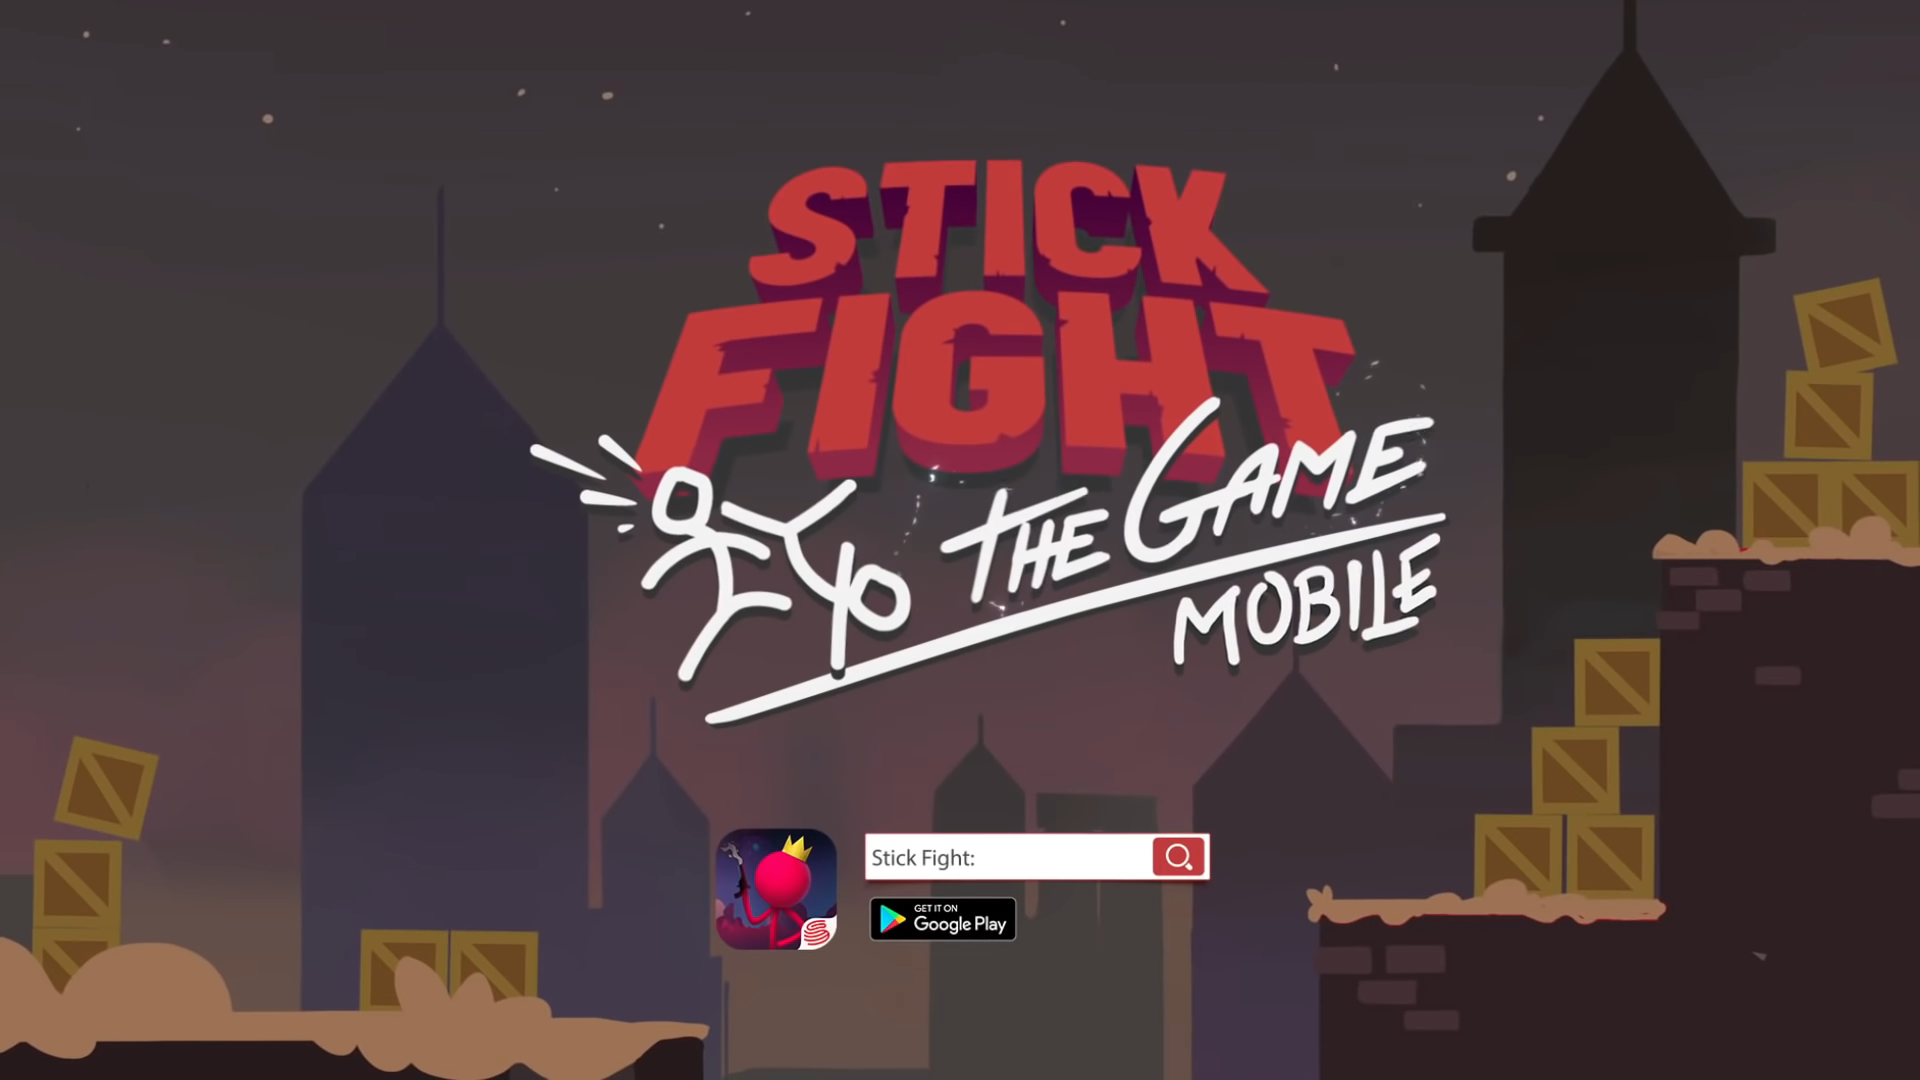 Stick fighting игра. Стик файт. Stick Fight: the game. Stickfightthegame. Stick Fight: the game mobile.